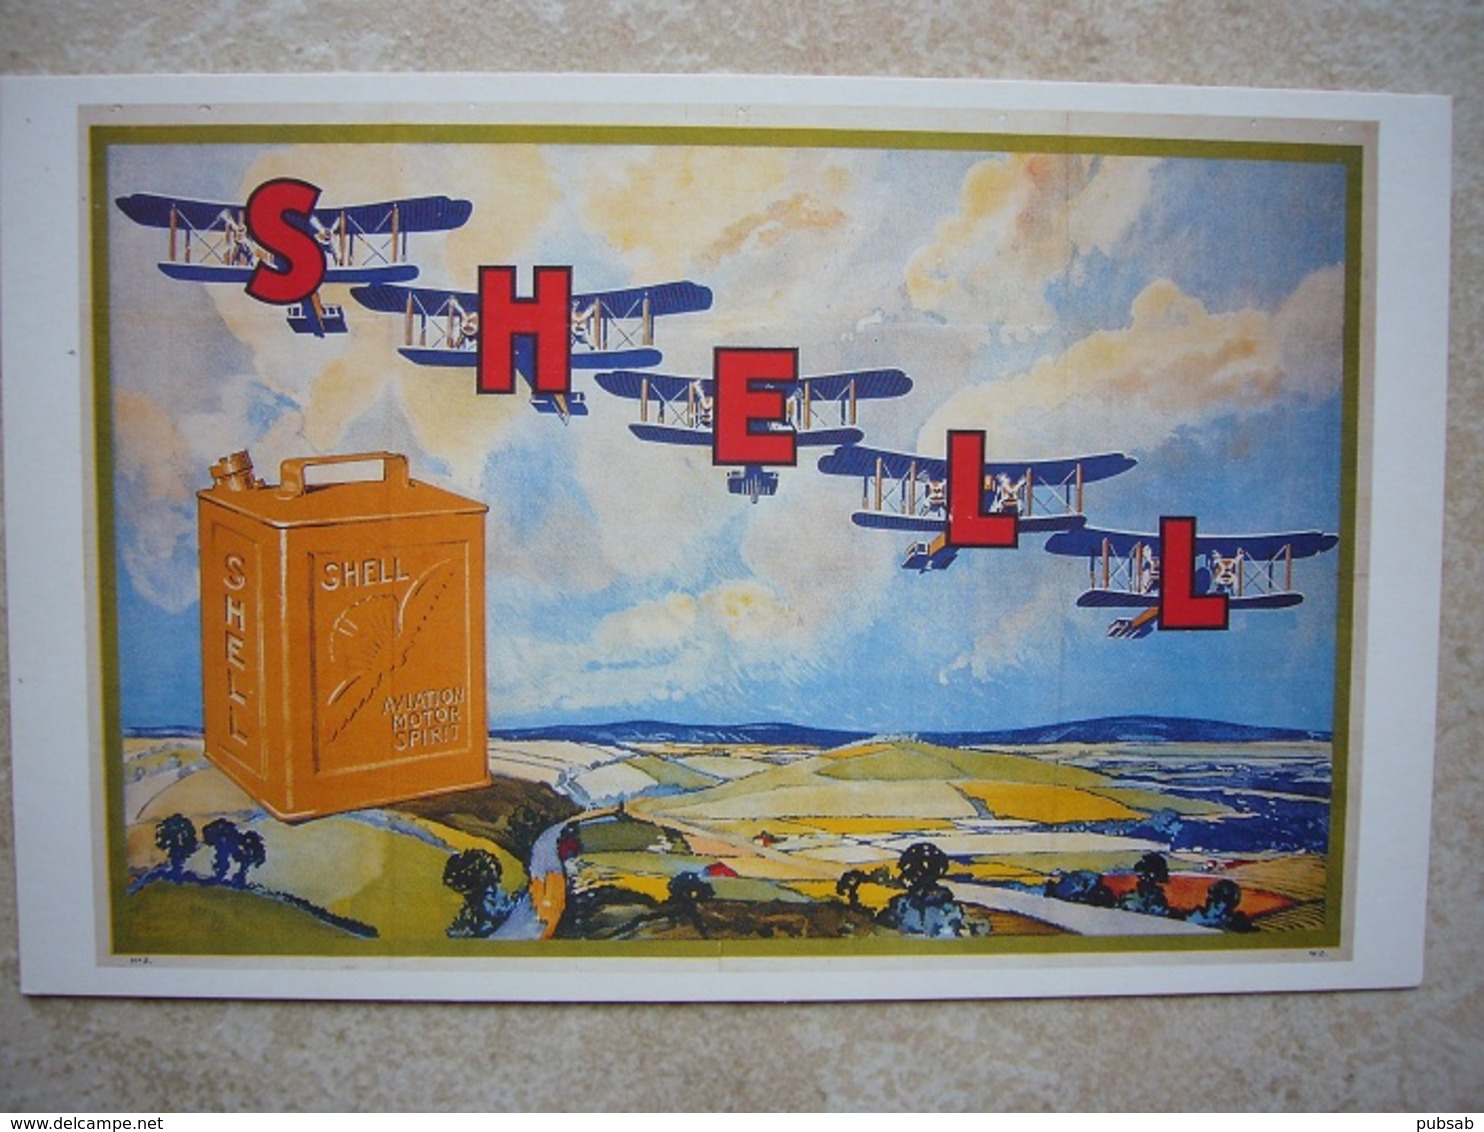 Avion / Airplane / IMPERIAL AIRWAYS / Handley Page W-8b / Reproductions From Original Shell Poster / 1994 - 1919-1938: Entre Guerras